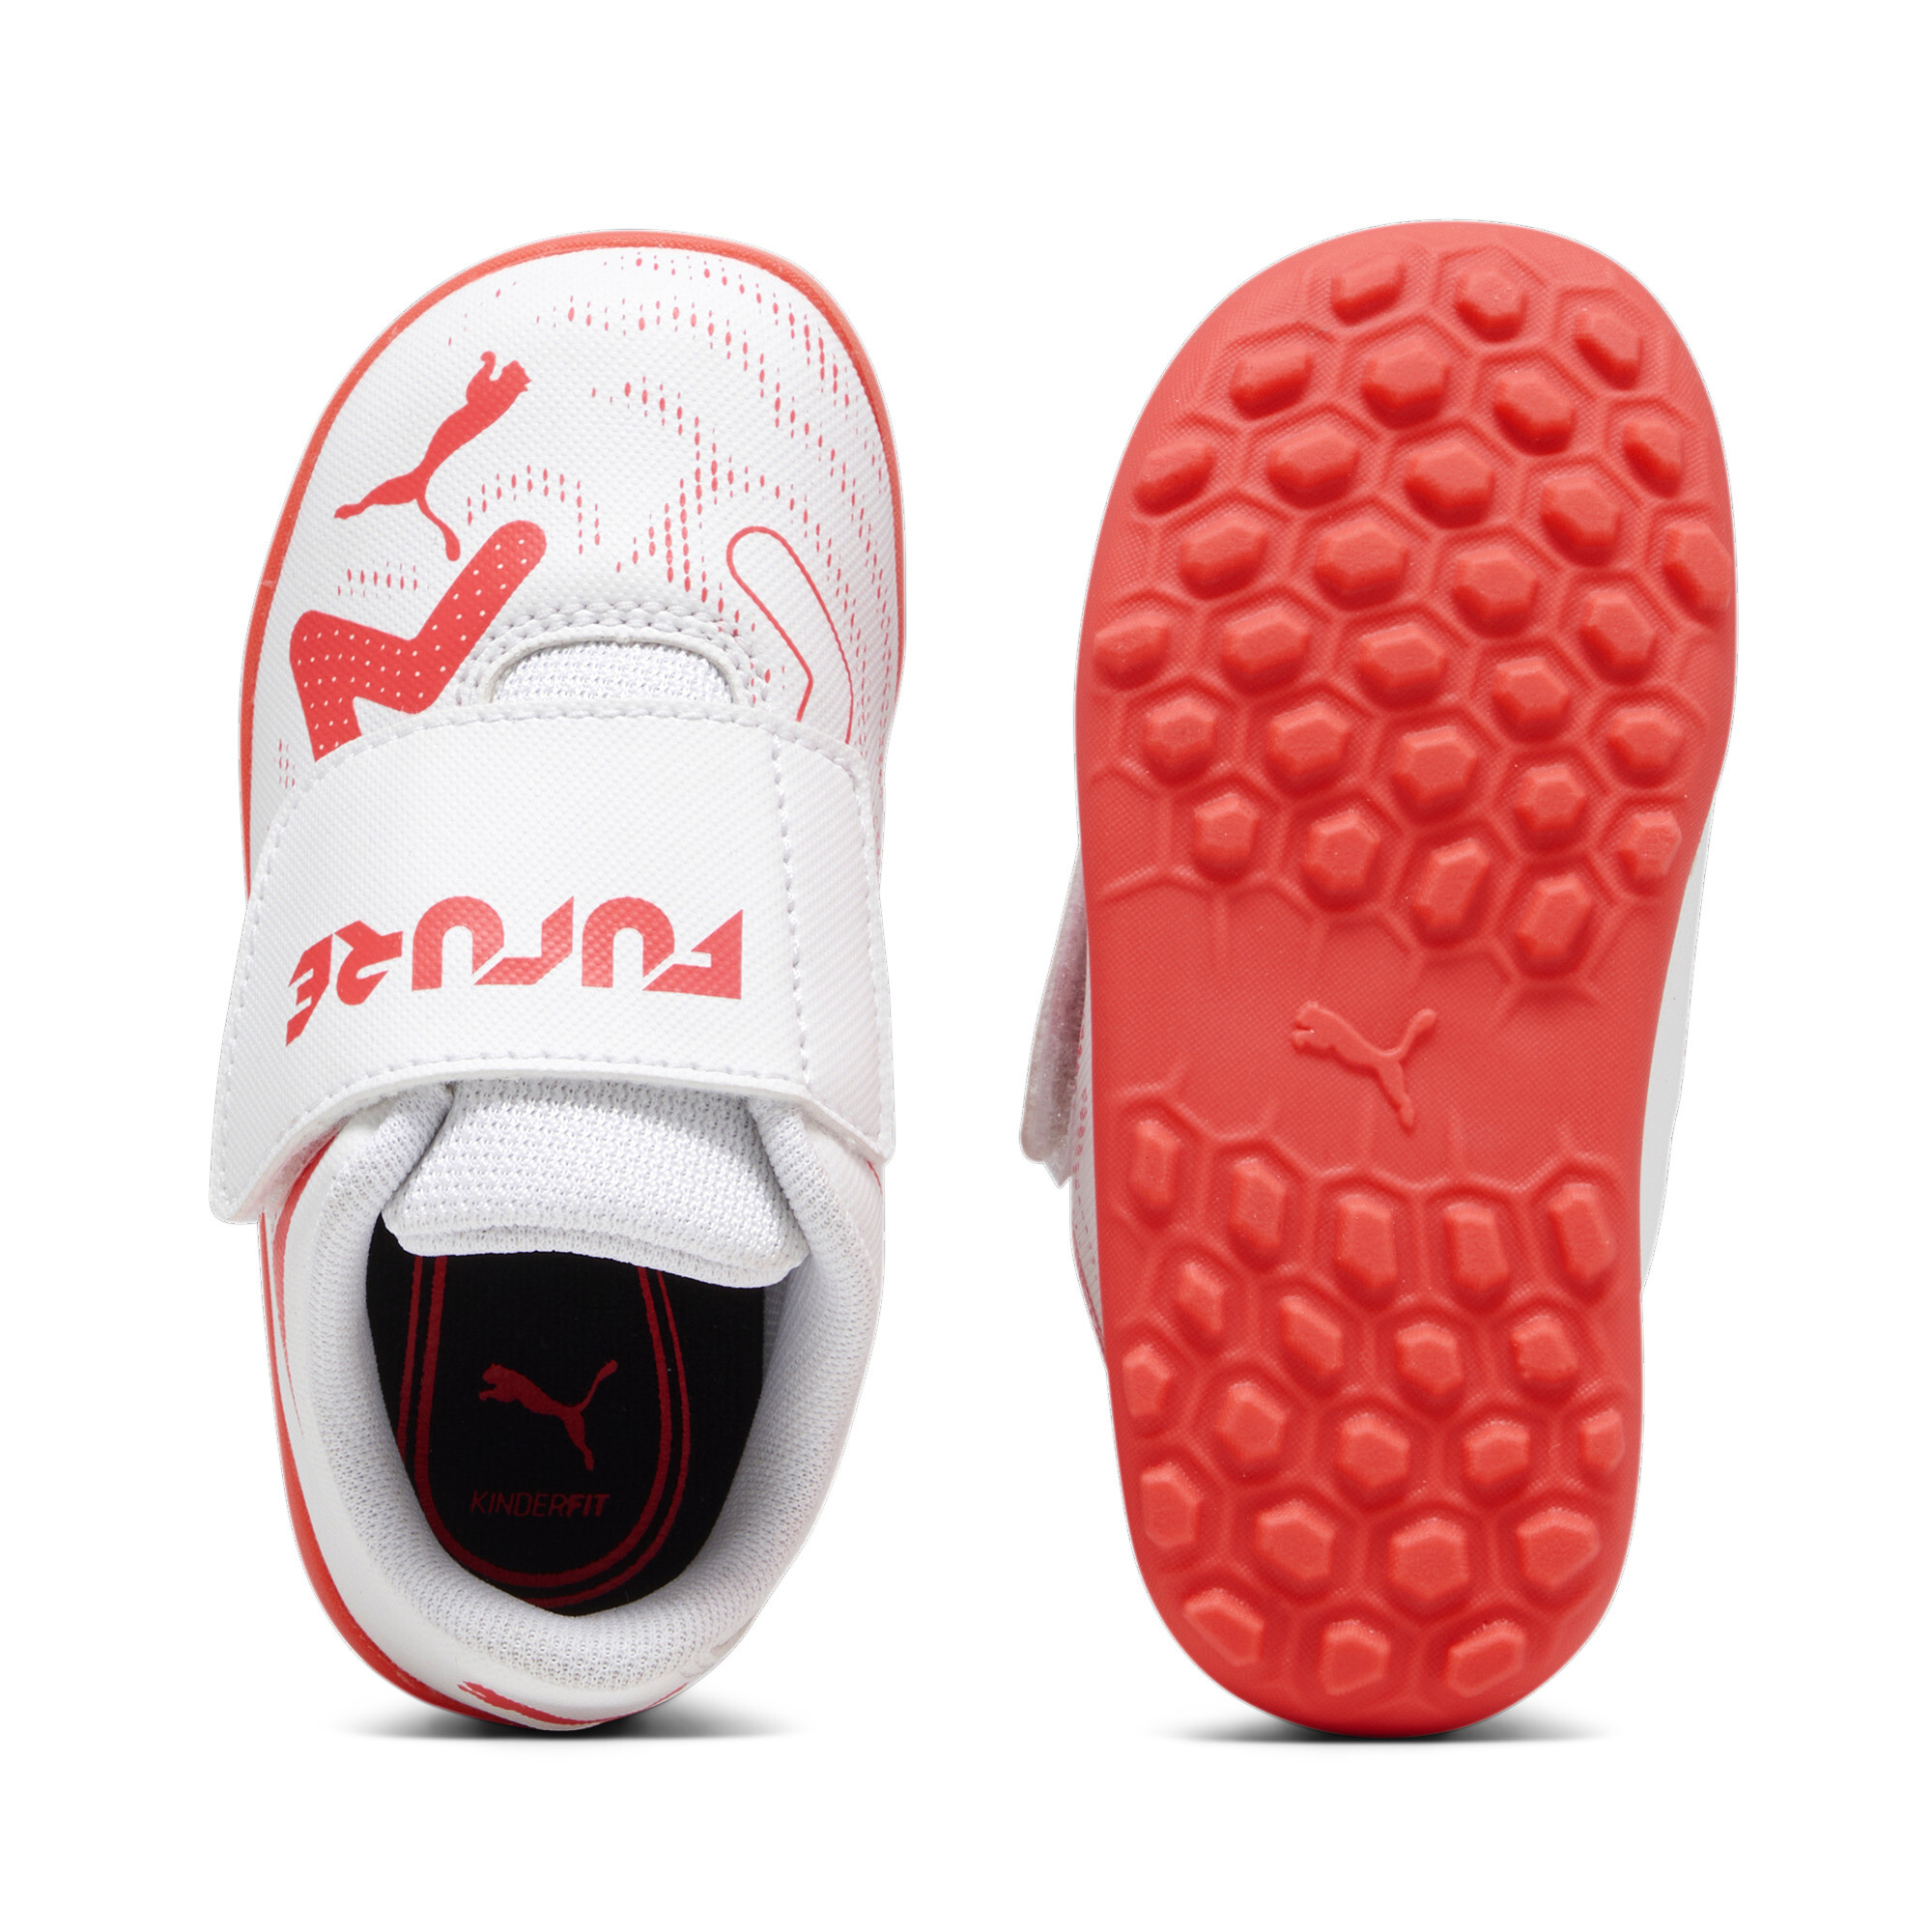 Kids' PUMA FUTURE PLAY TT Toddlers' Football Boots In White, Size EU 27